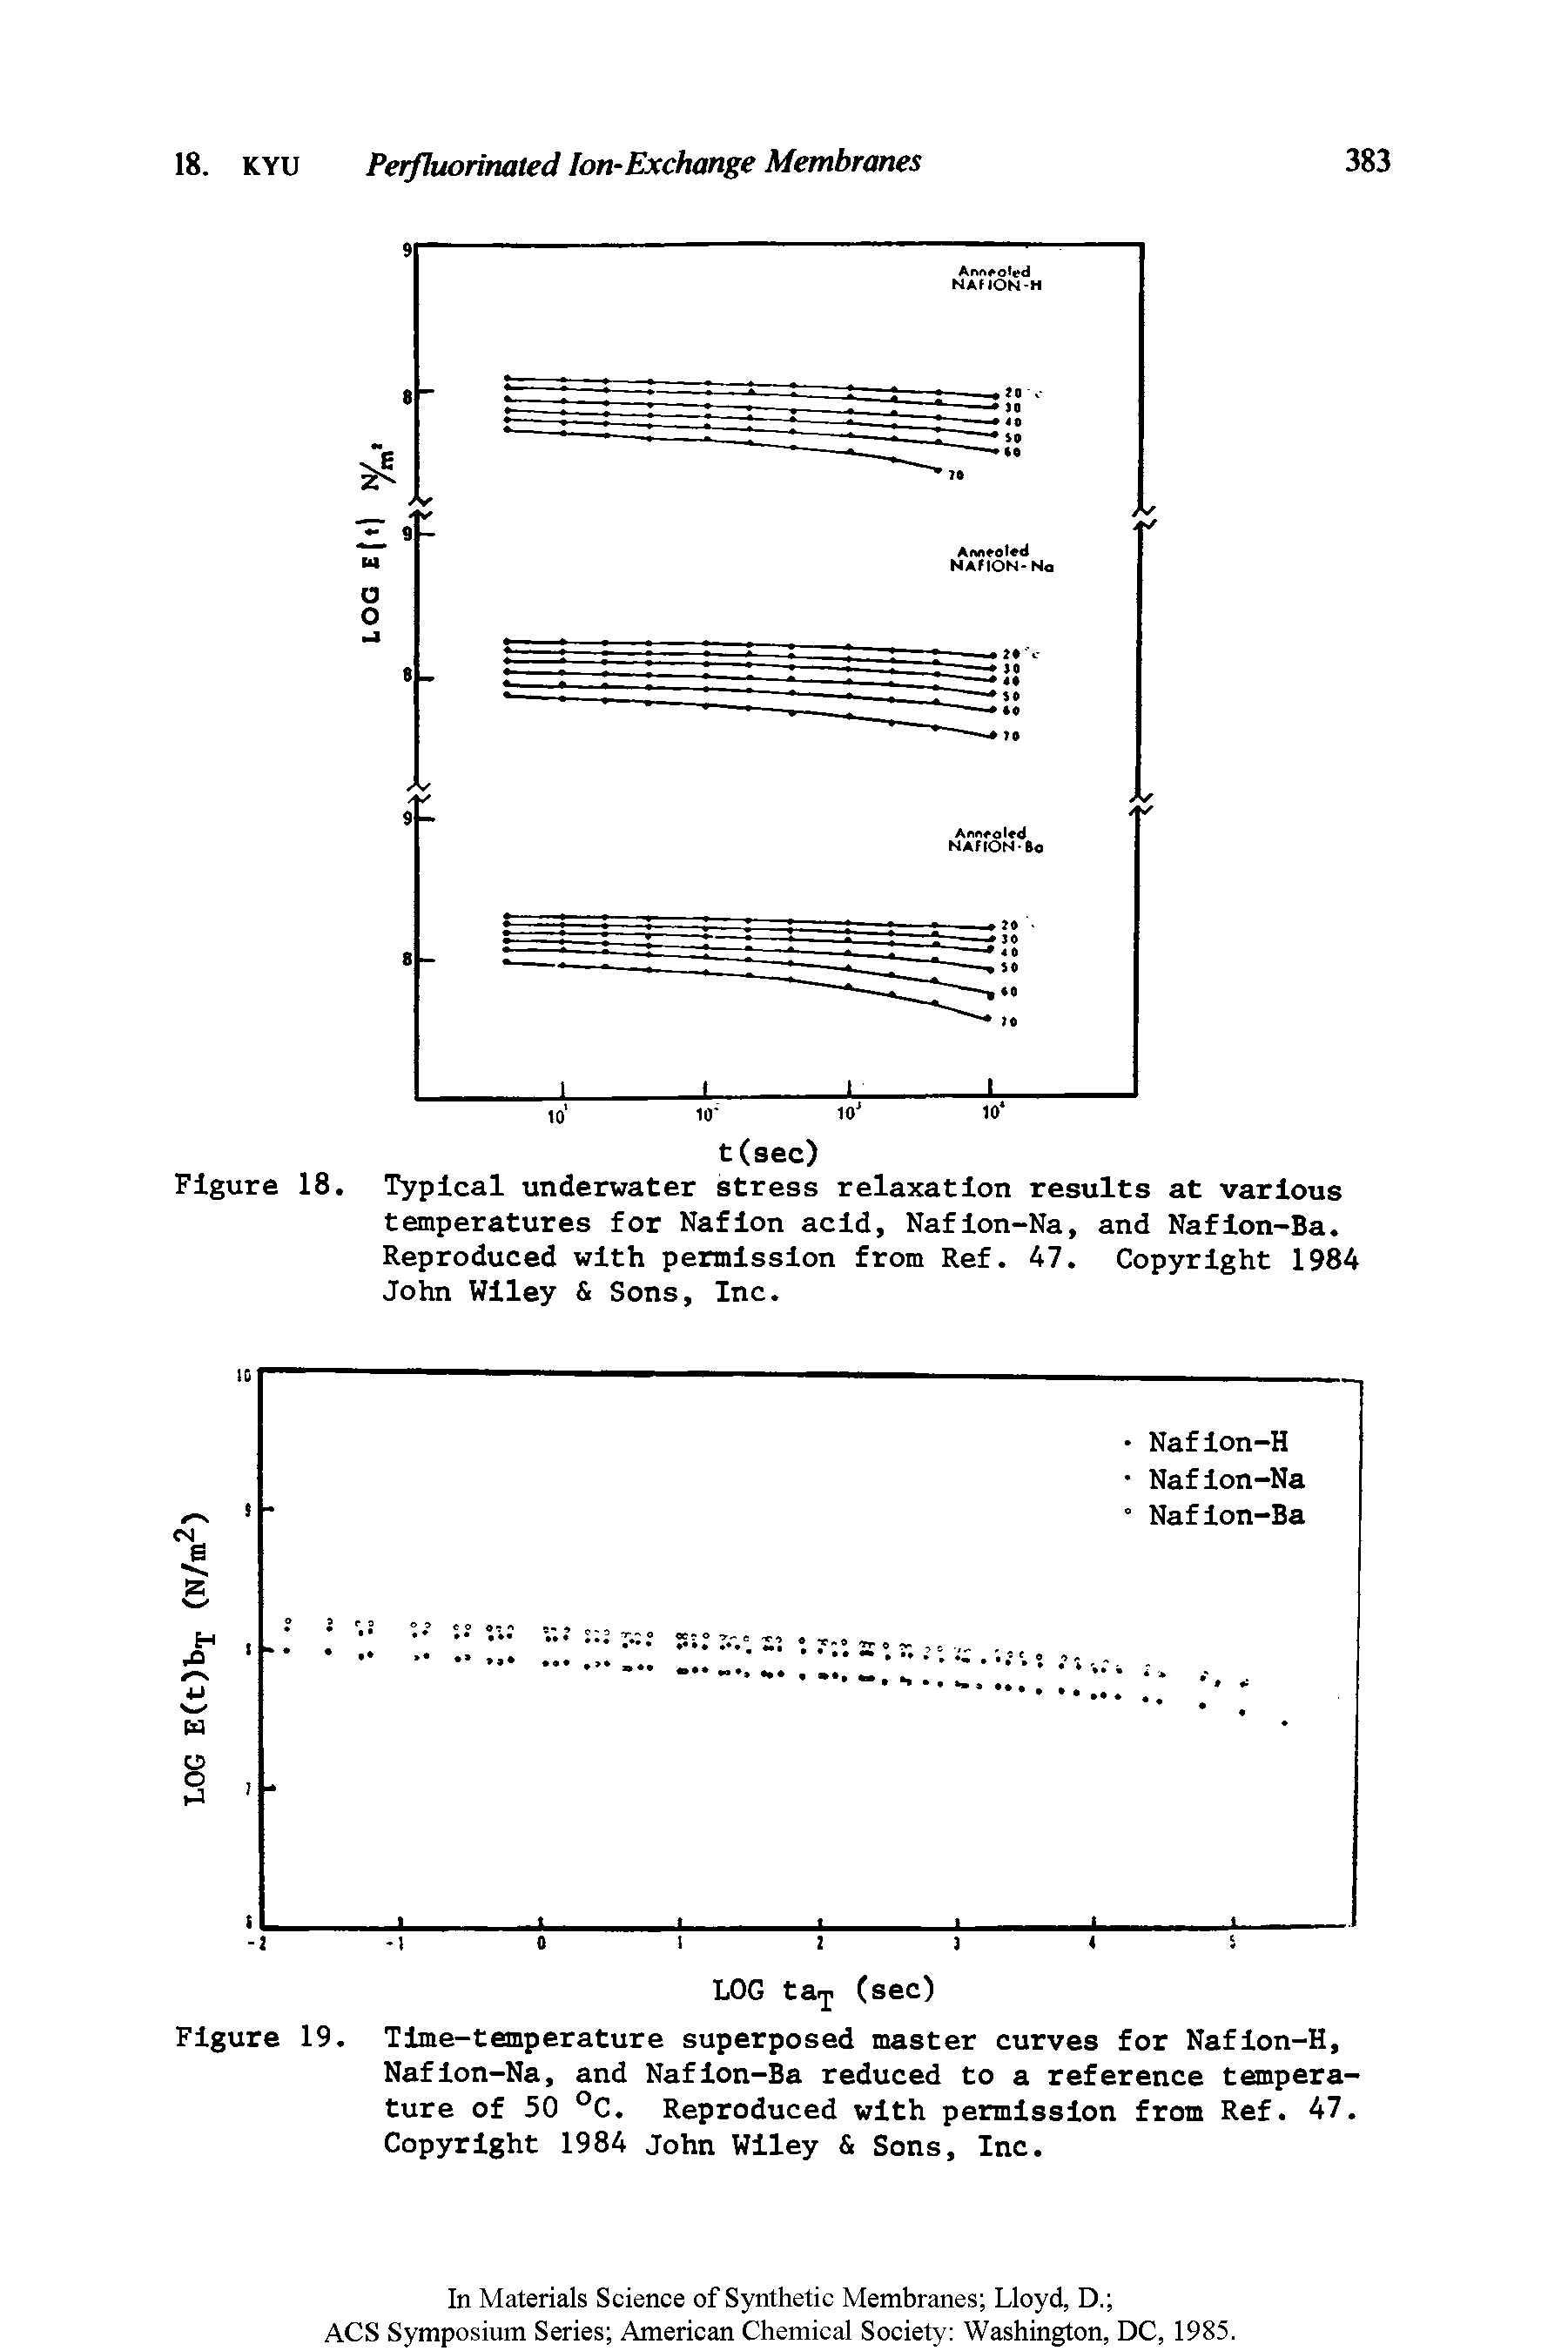 Figure 18. Typical underwater stress relaxation results at various temperatures for Naflon acid, Nafion-Na, and Naflon-Ba. Reproduced with permission from Ref. 47. Copyright 1984 John Wiley Sons, Inc.